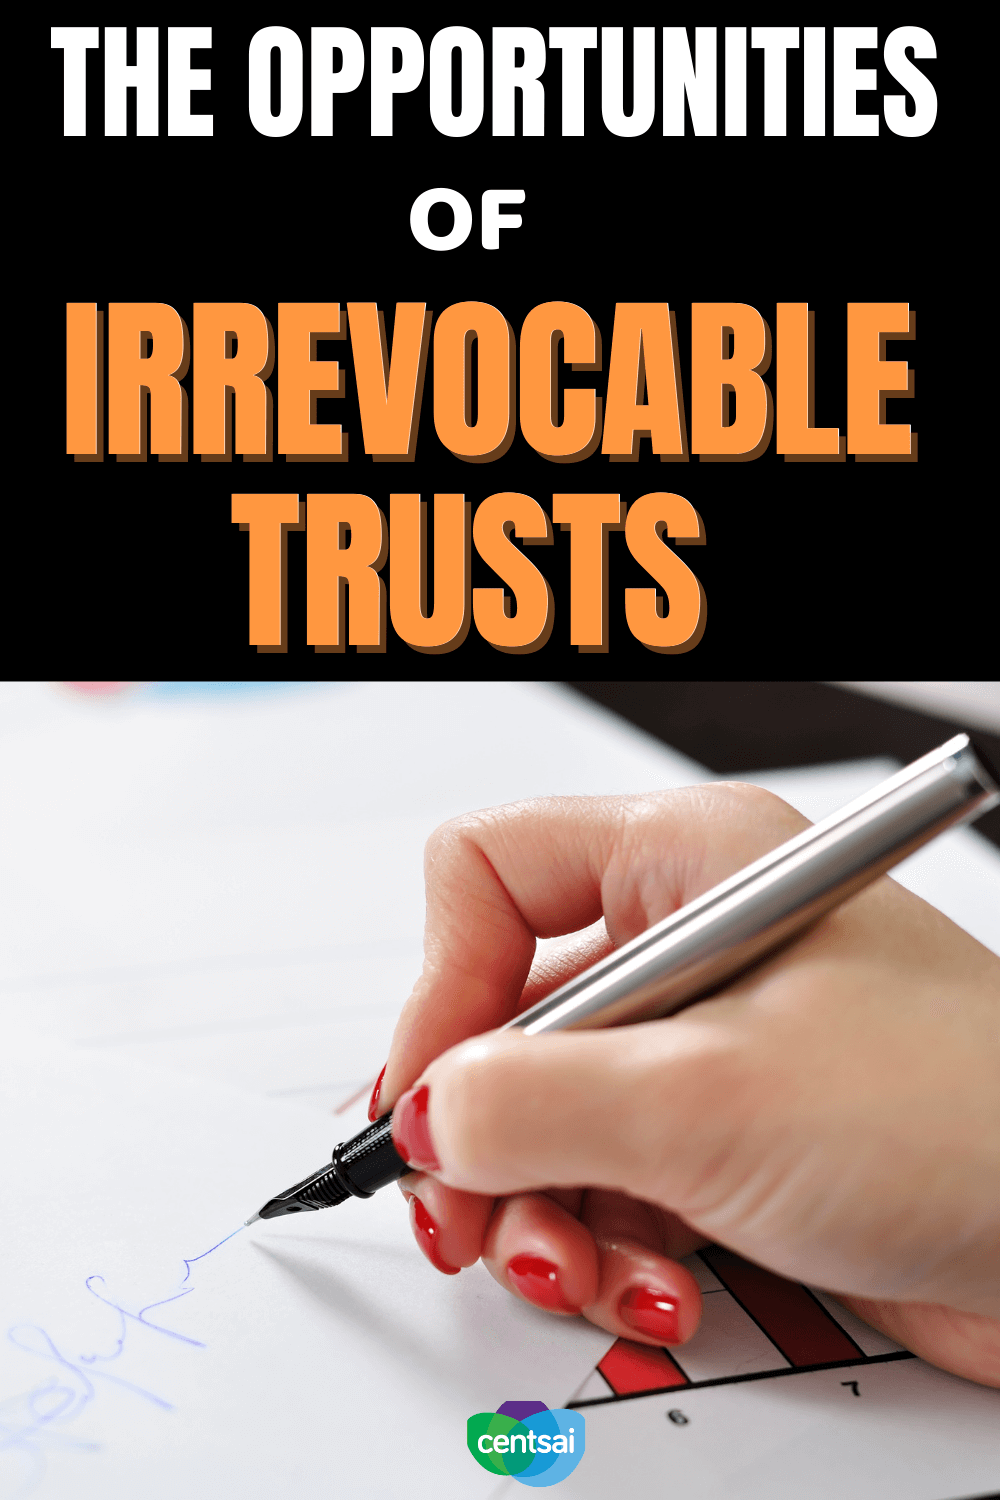 The Opportunities of Irrevocable Trusts. Irrevocable trusts ensure tax benefits to the guarantor, but they come with restrictions. Read up on what you should know beforehand. Check out CentSai to learn more about financial planning tips. #CentSai #Irrevocabletrusts #financialplanning #moneymanagement